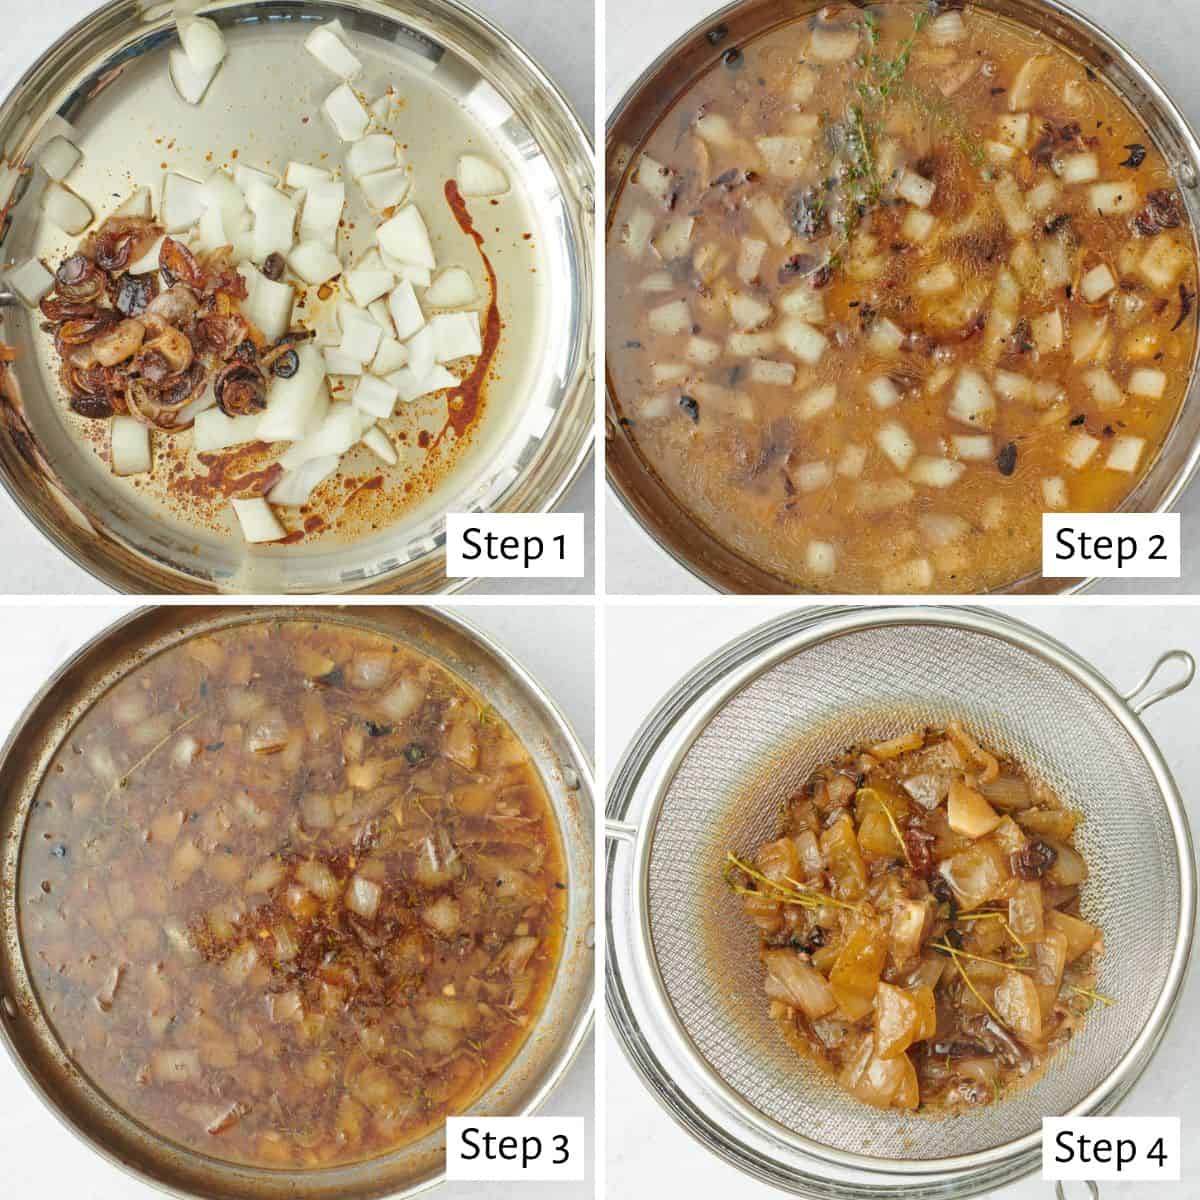 4 image collage making recipe: 1- drippings and extra fresh onions in a skillet, 2- after sautéing onions with broth and seasoning added, 3- after simmering and reducing, 4- straining au jus.